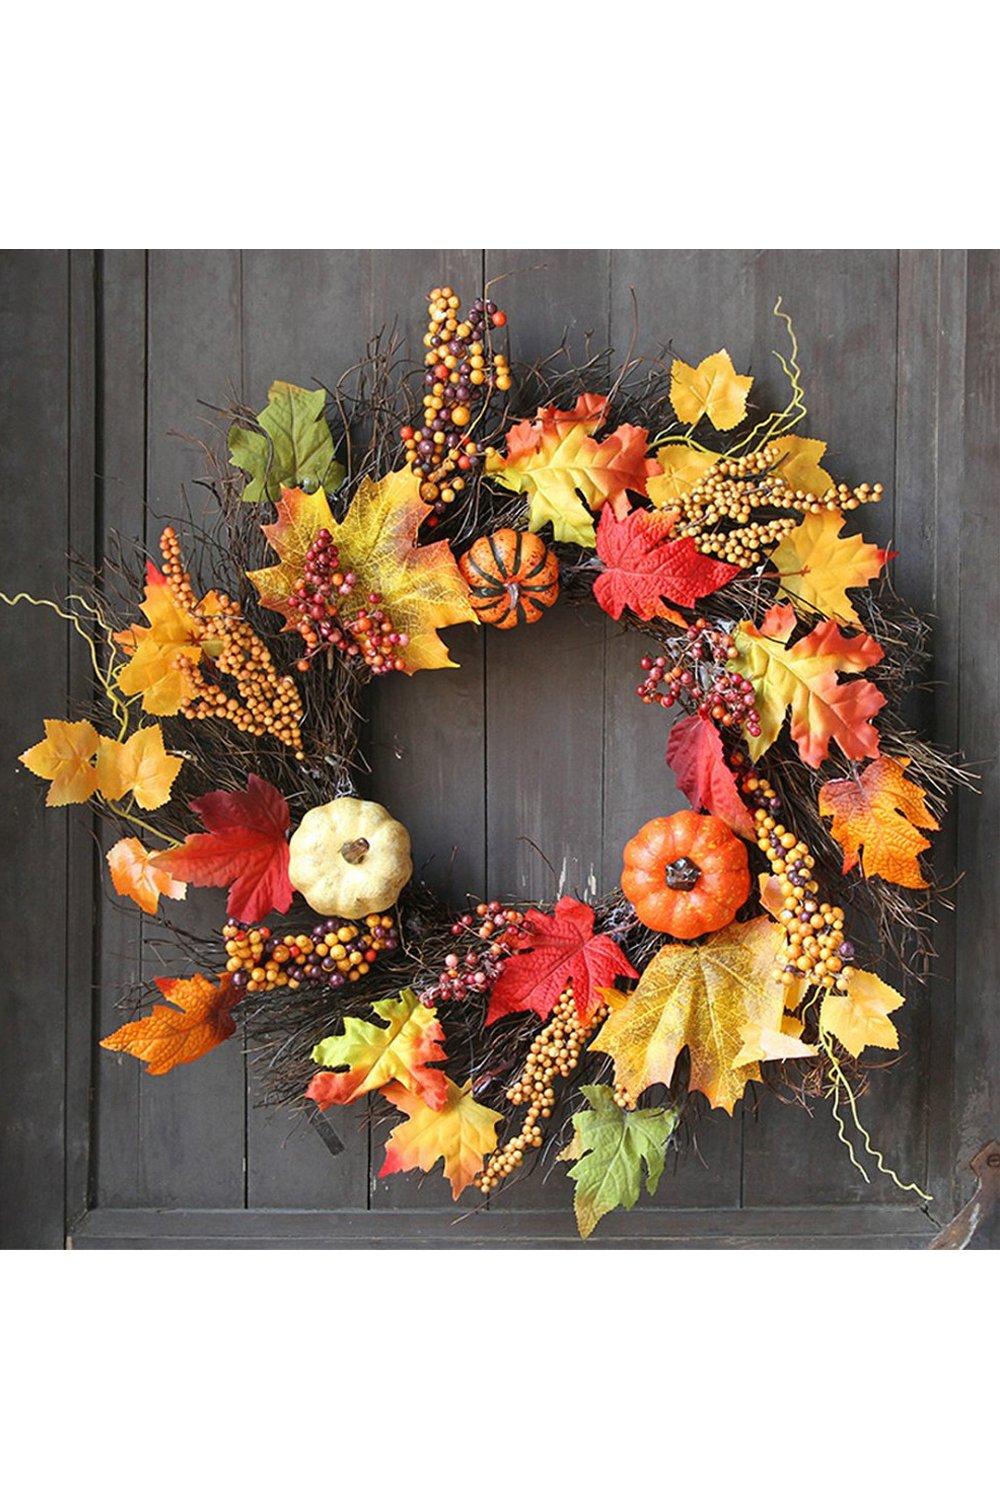 Rustic Battery Operated LED Fall Wreath with Artificial Maple Leaves Halloween Decoration